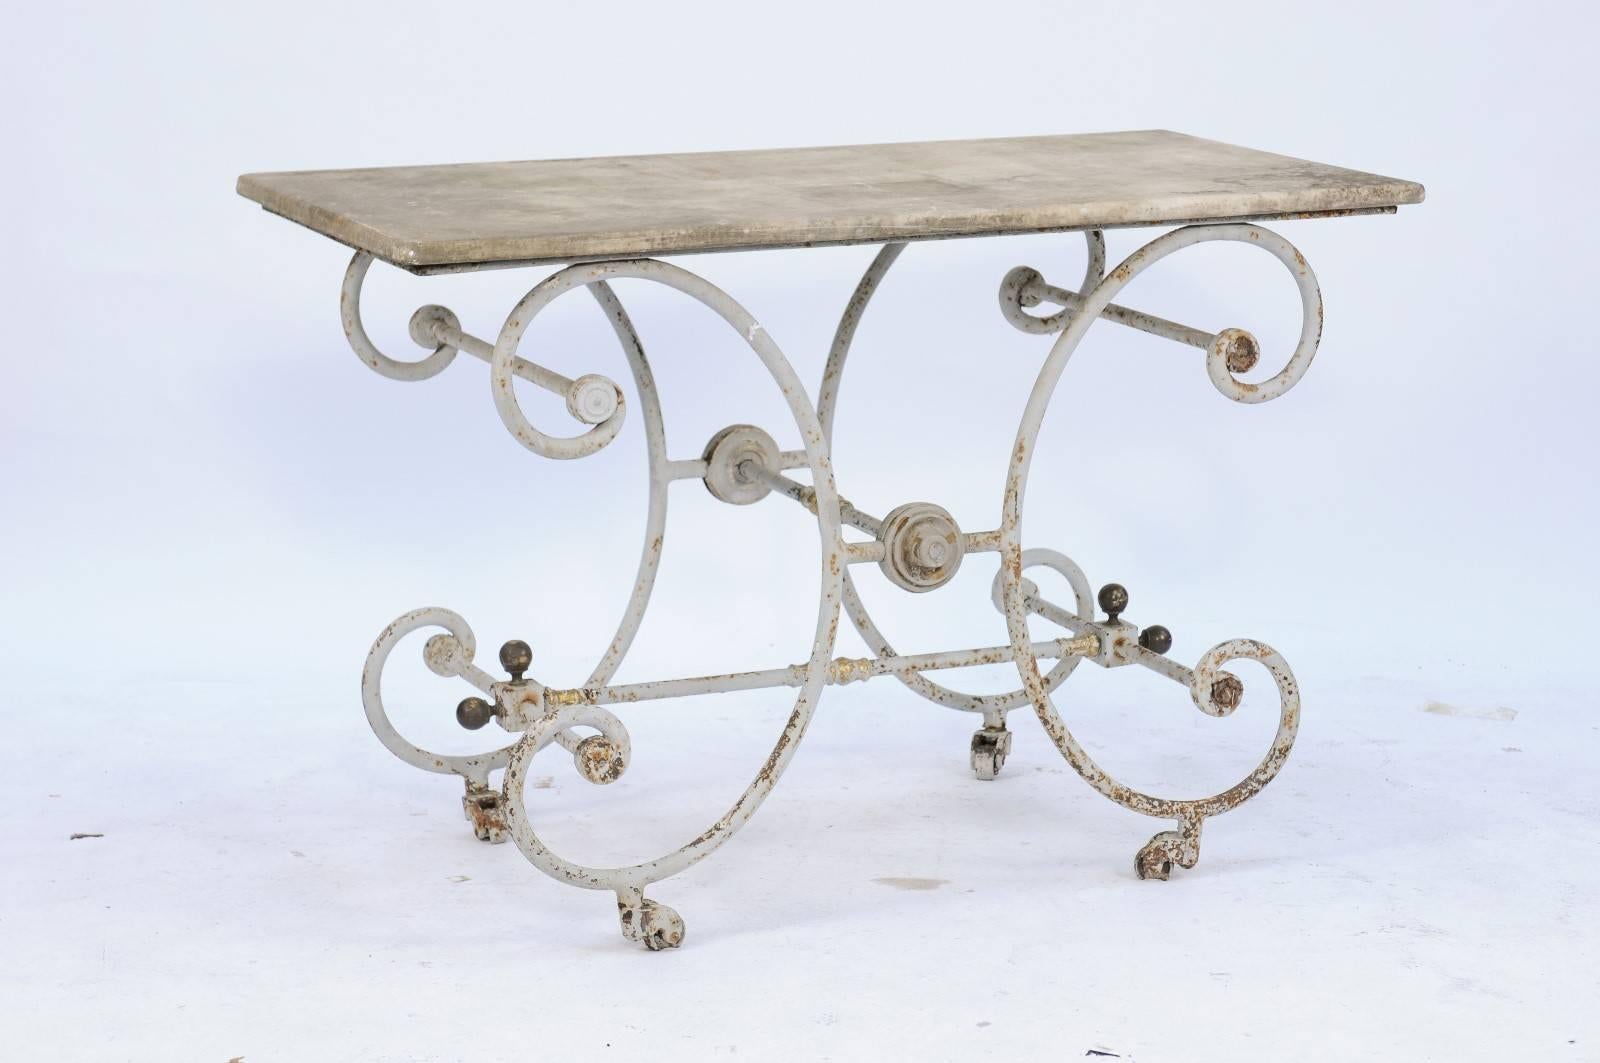 A French early 20th century baker's table with stone top and C-scroll shaped iron base. We love a gorgeous baker’s table, and this one from the 1900s doesn’t disappoint! We were first drawn to the beautifully worn creamy stone top, but it was the